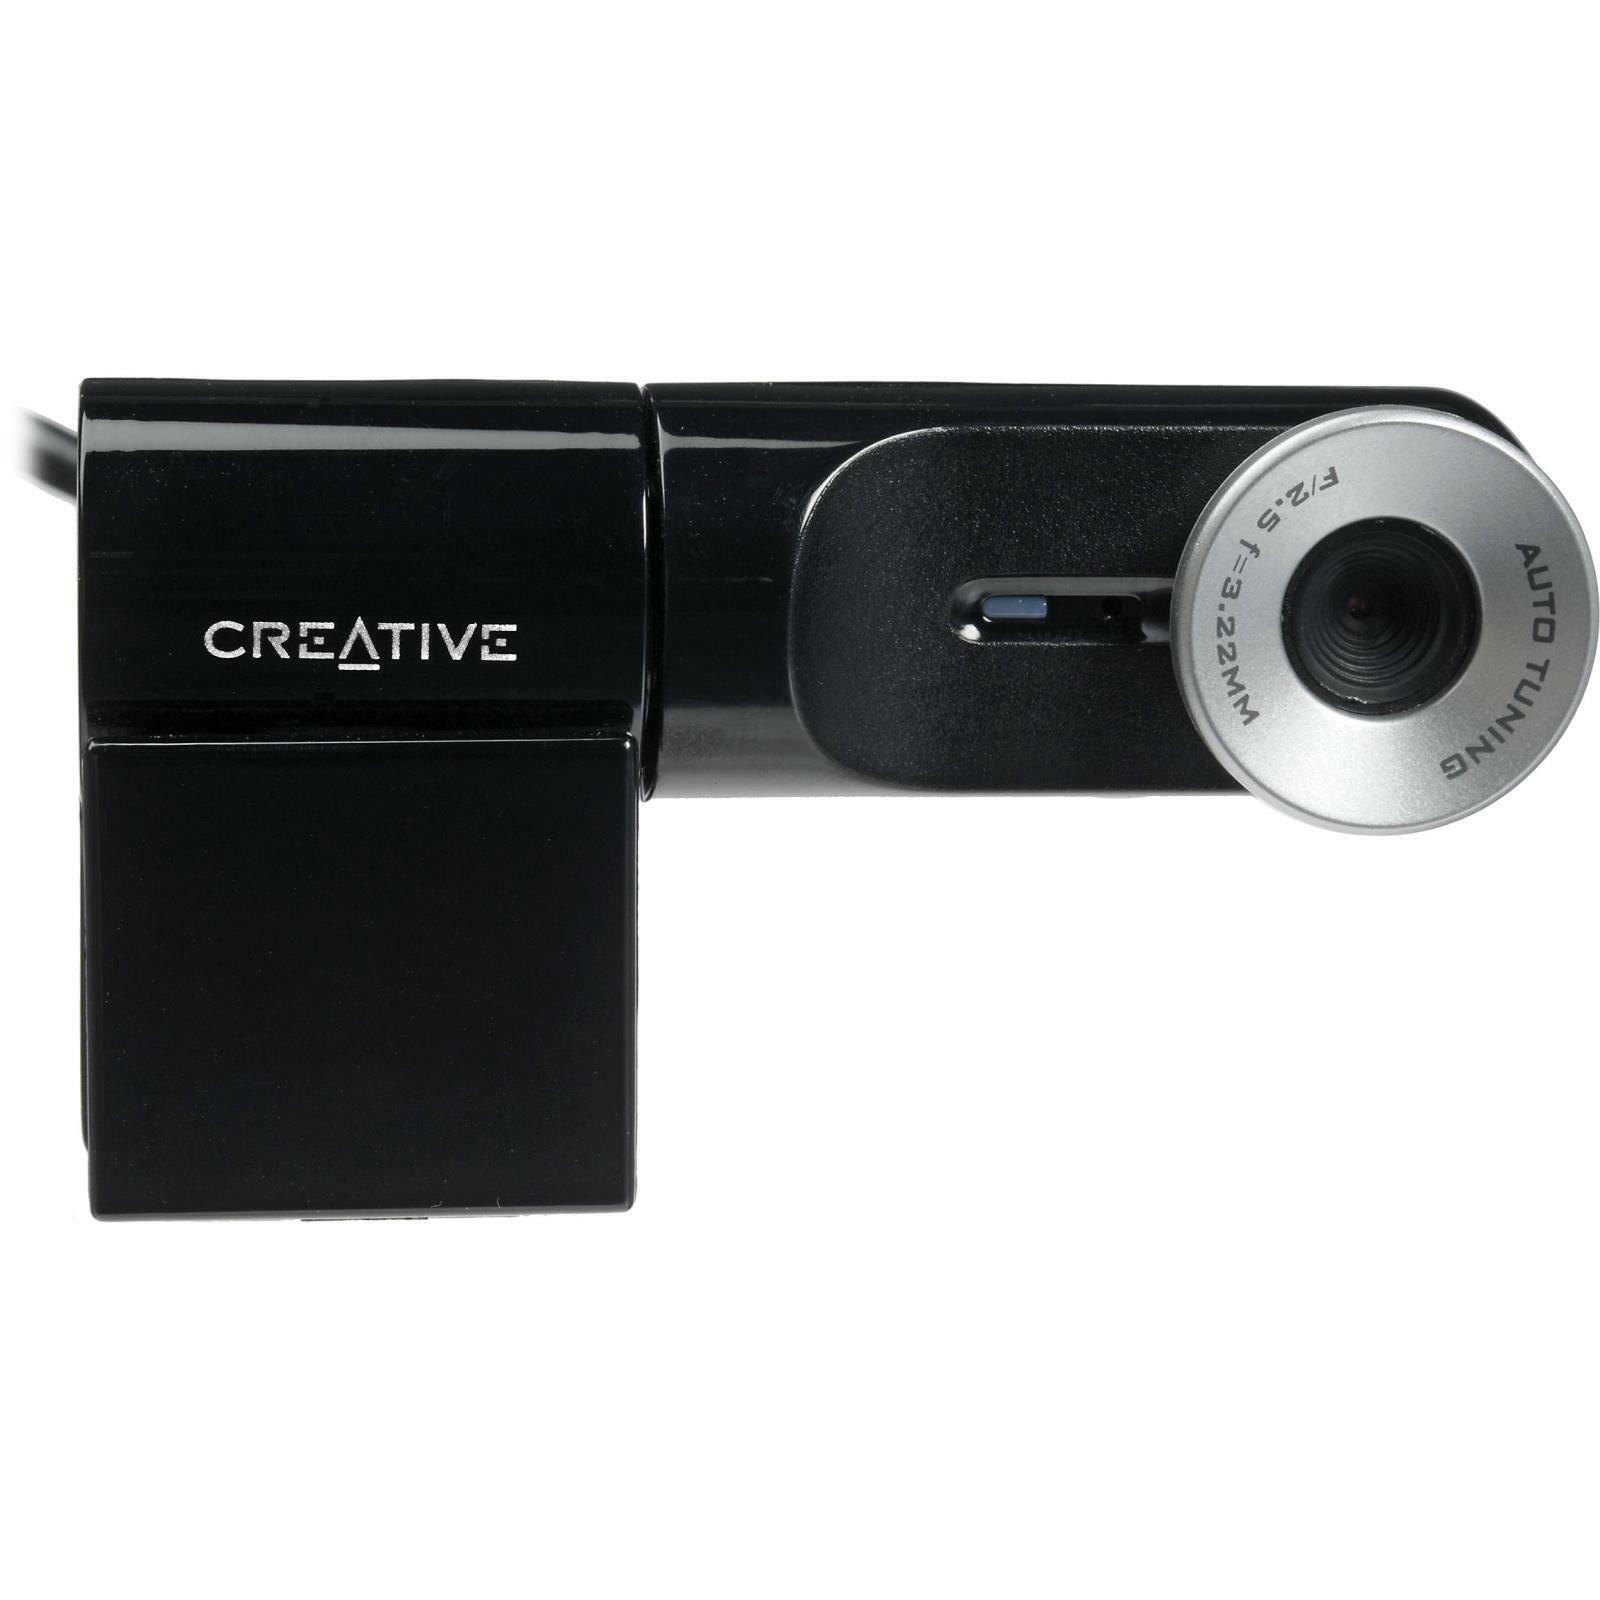 New Creative Labs VF0400 Live! Cam Notebook Pro 1.3 MP